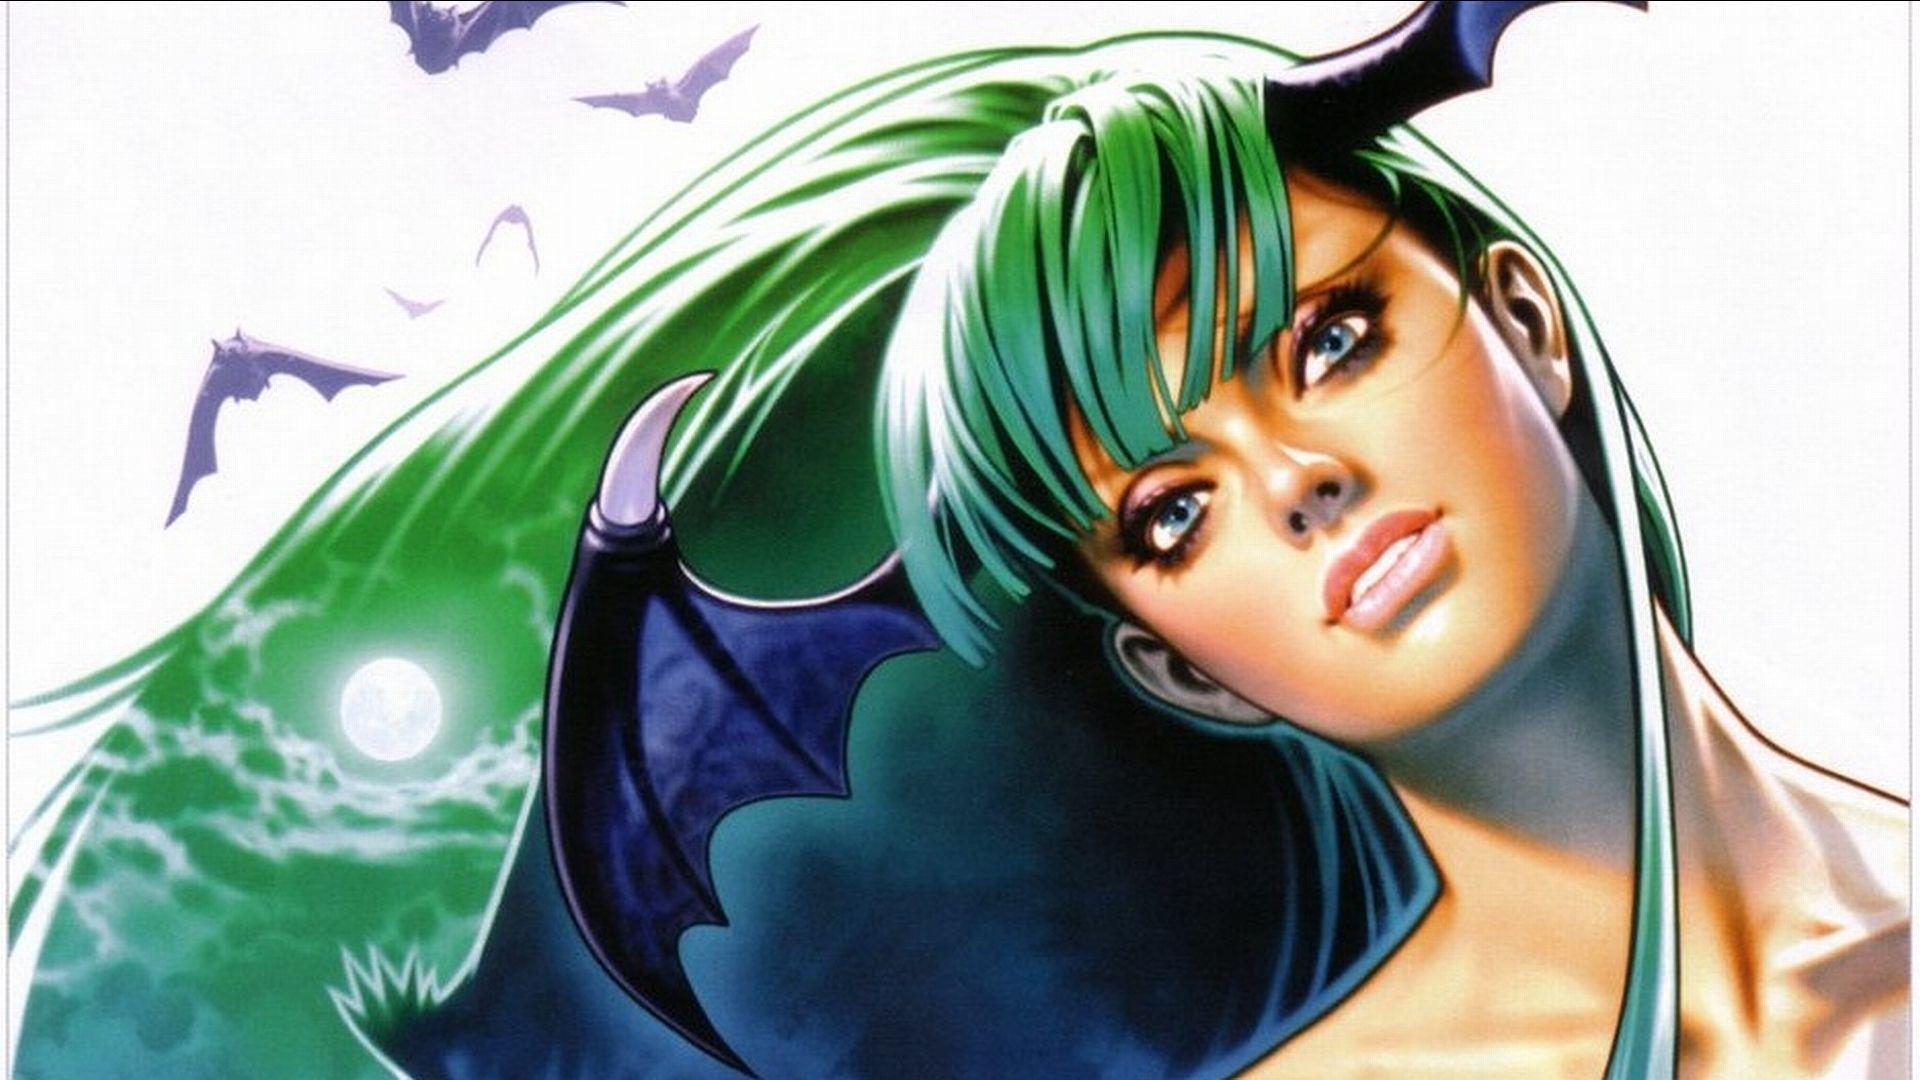 Darkstalkers Full HD Wallpaper and Background Imagex1080